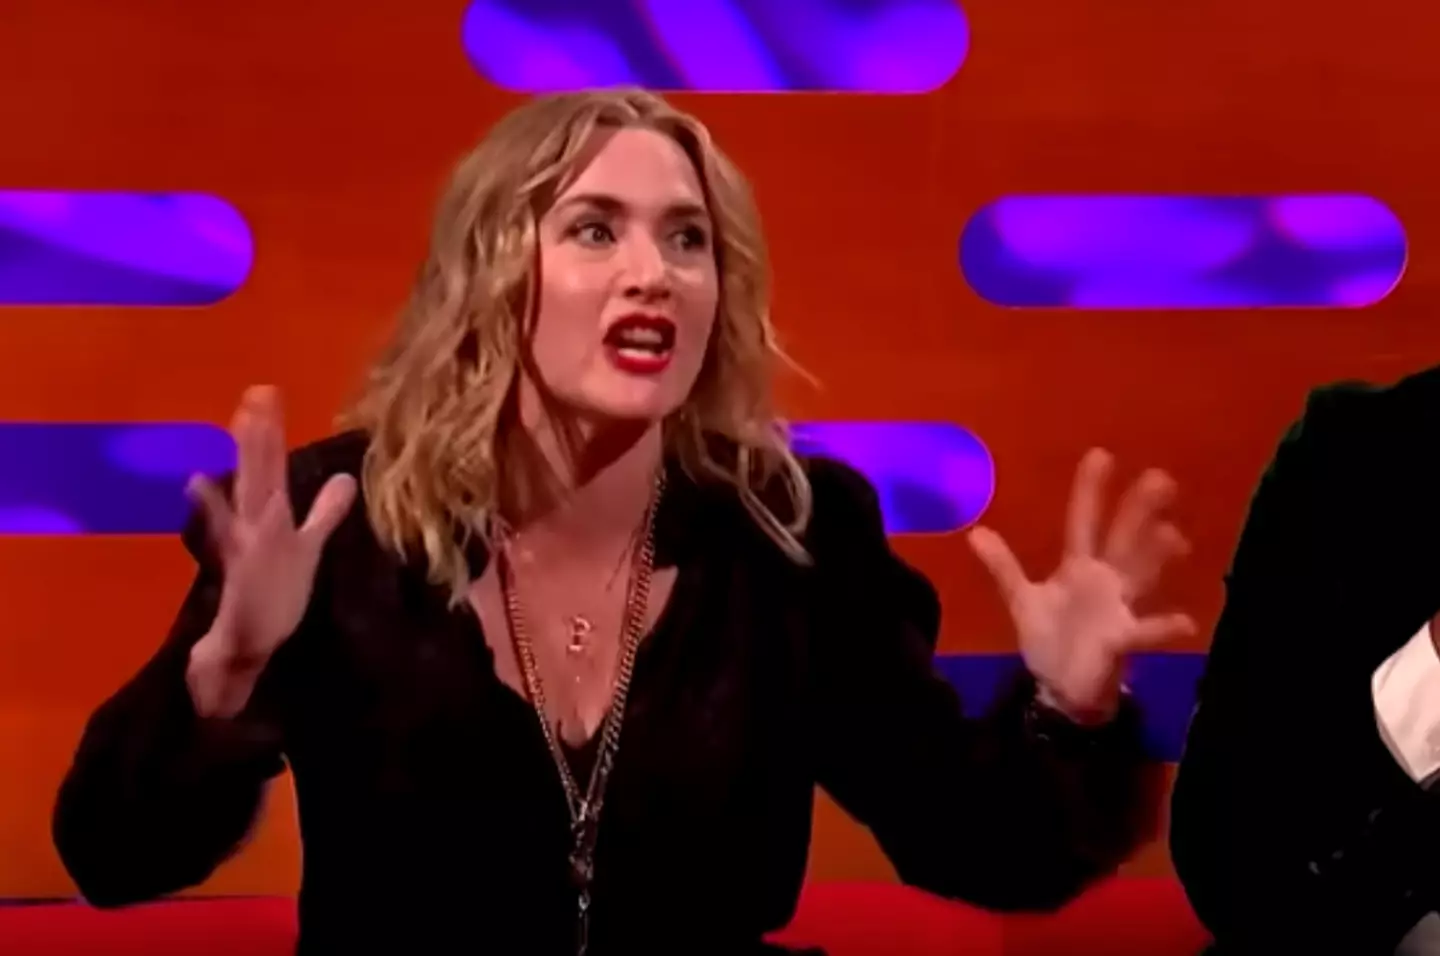 Fans of the star are in stitches over Winslet's story.